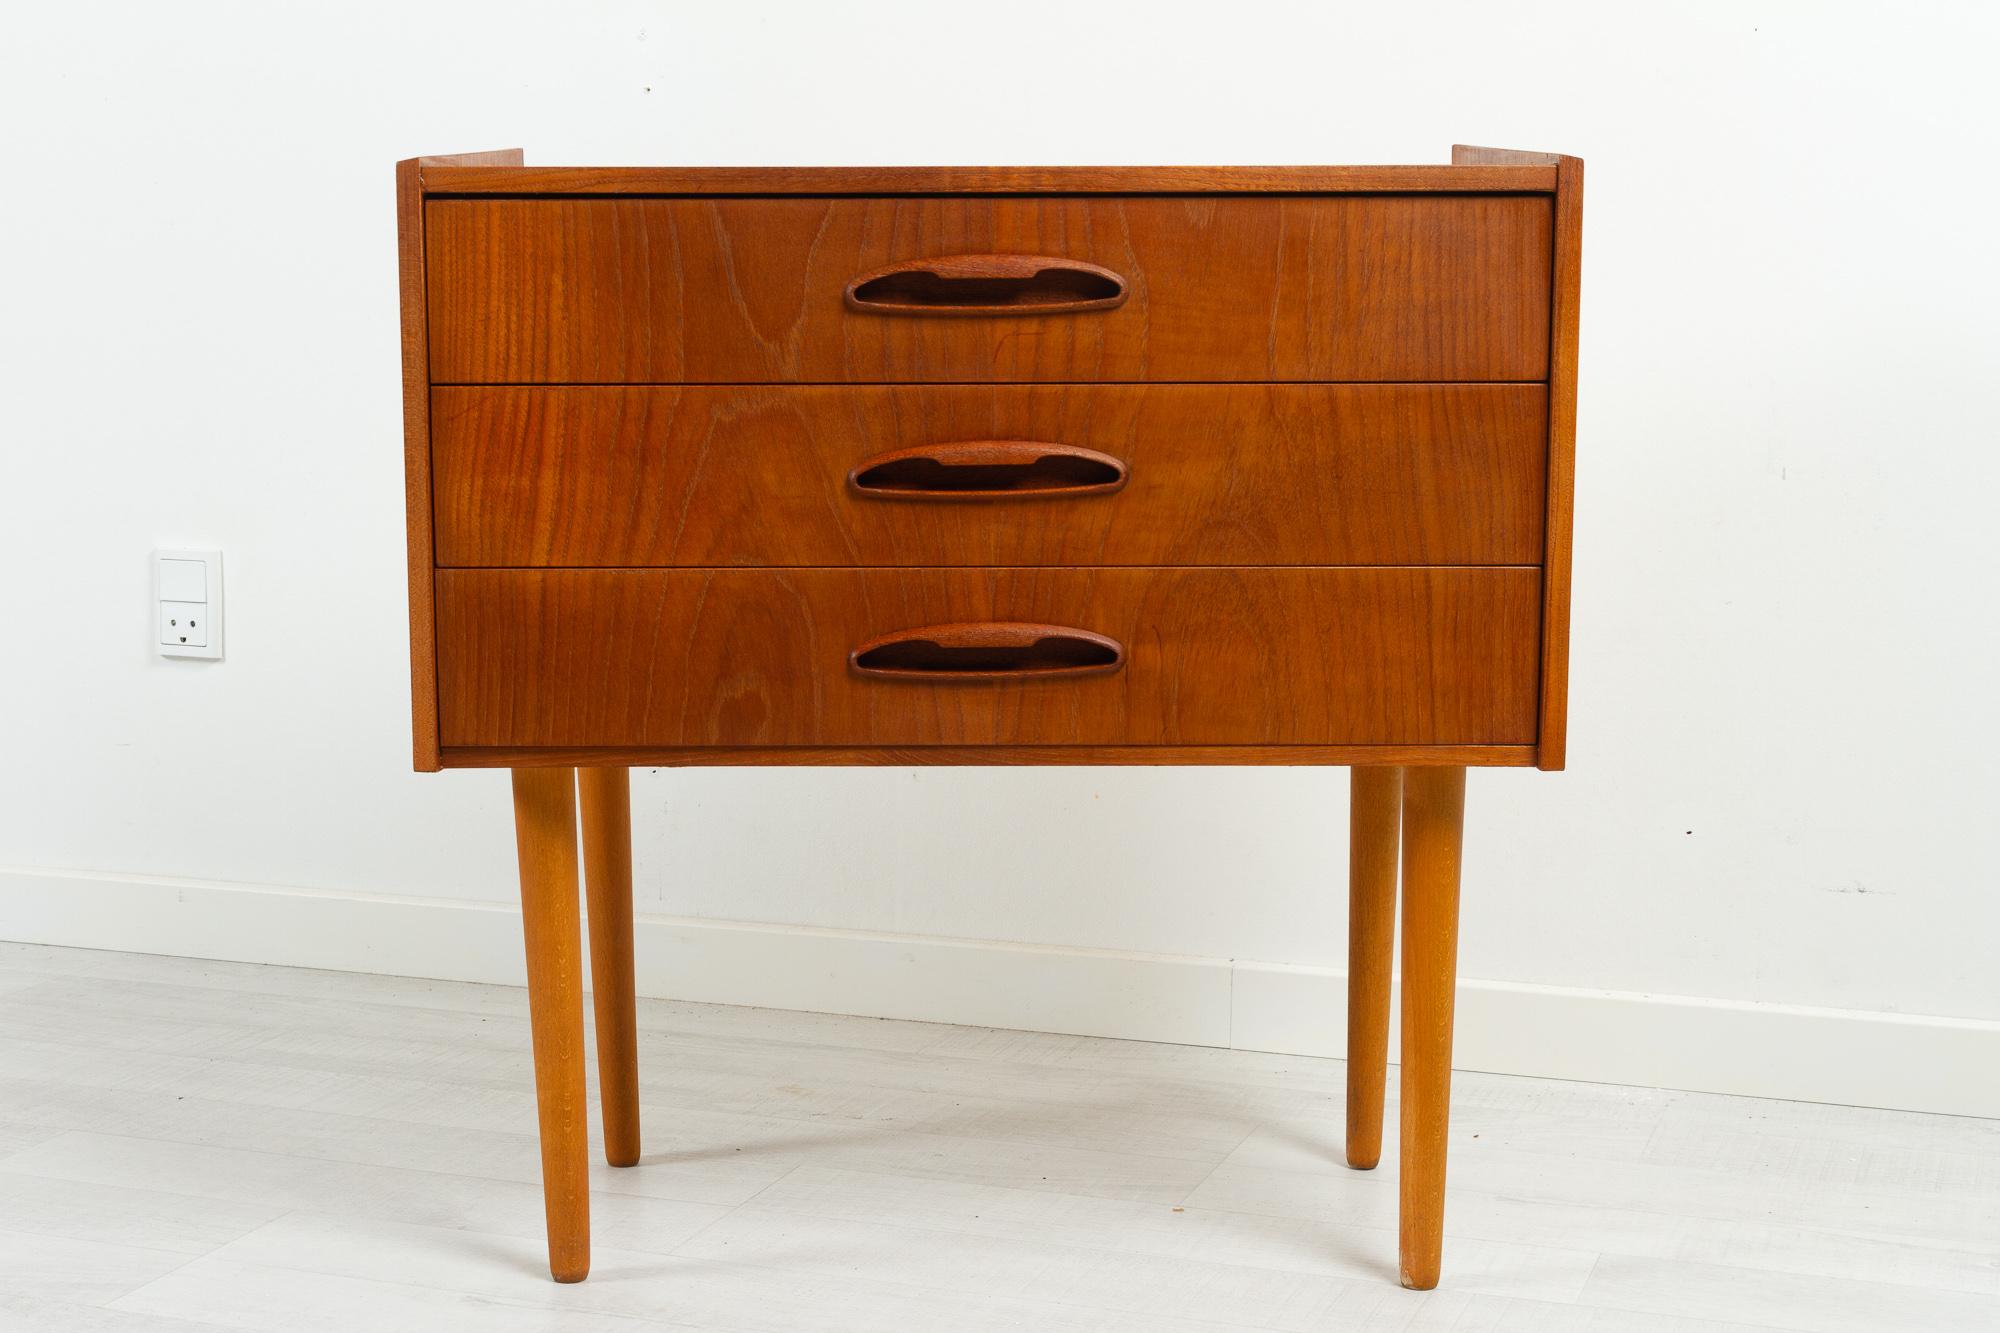 Vintage Danish teak dresser 1960s
Small vintage chest of drawers with three drawers. Sculpted pulls in solid teak, legs in solid beech.
Suitable also as a bedside table or side table.
Good vintage condition. Wood with natural patina. Small nicks